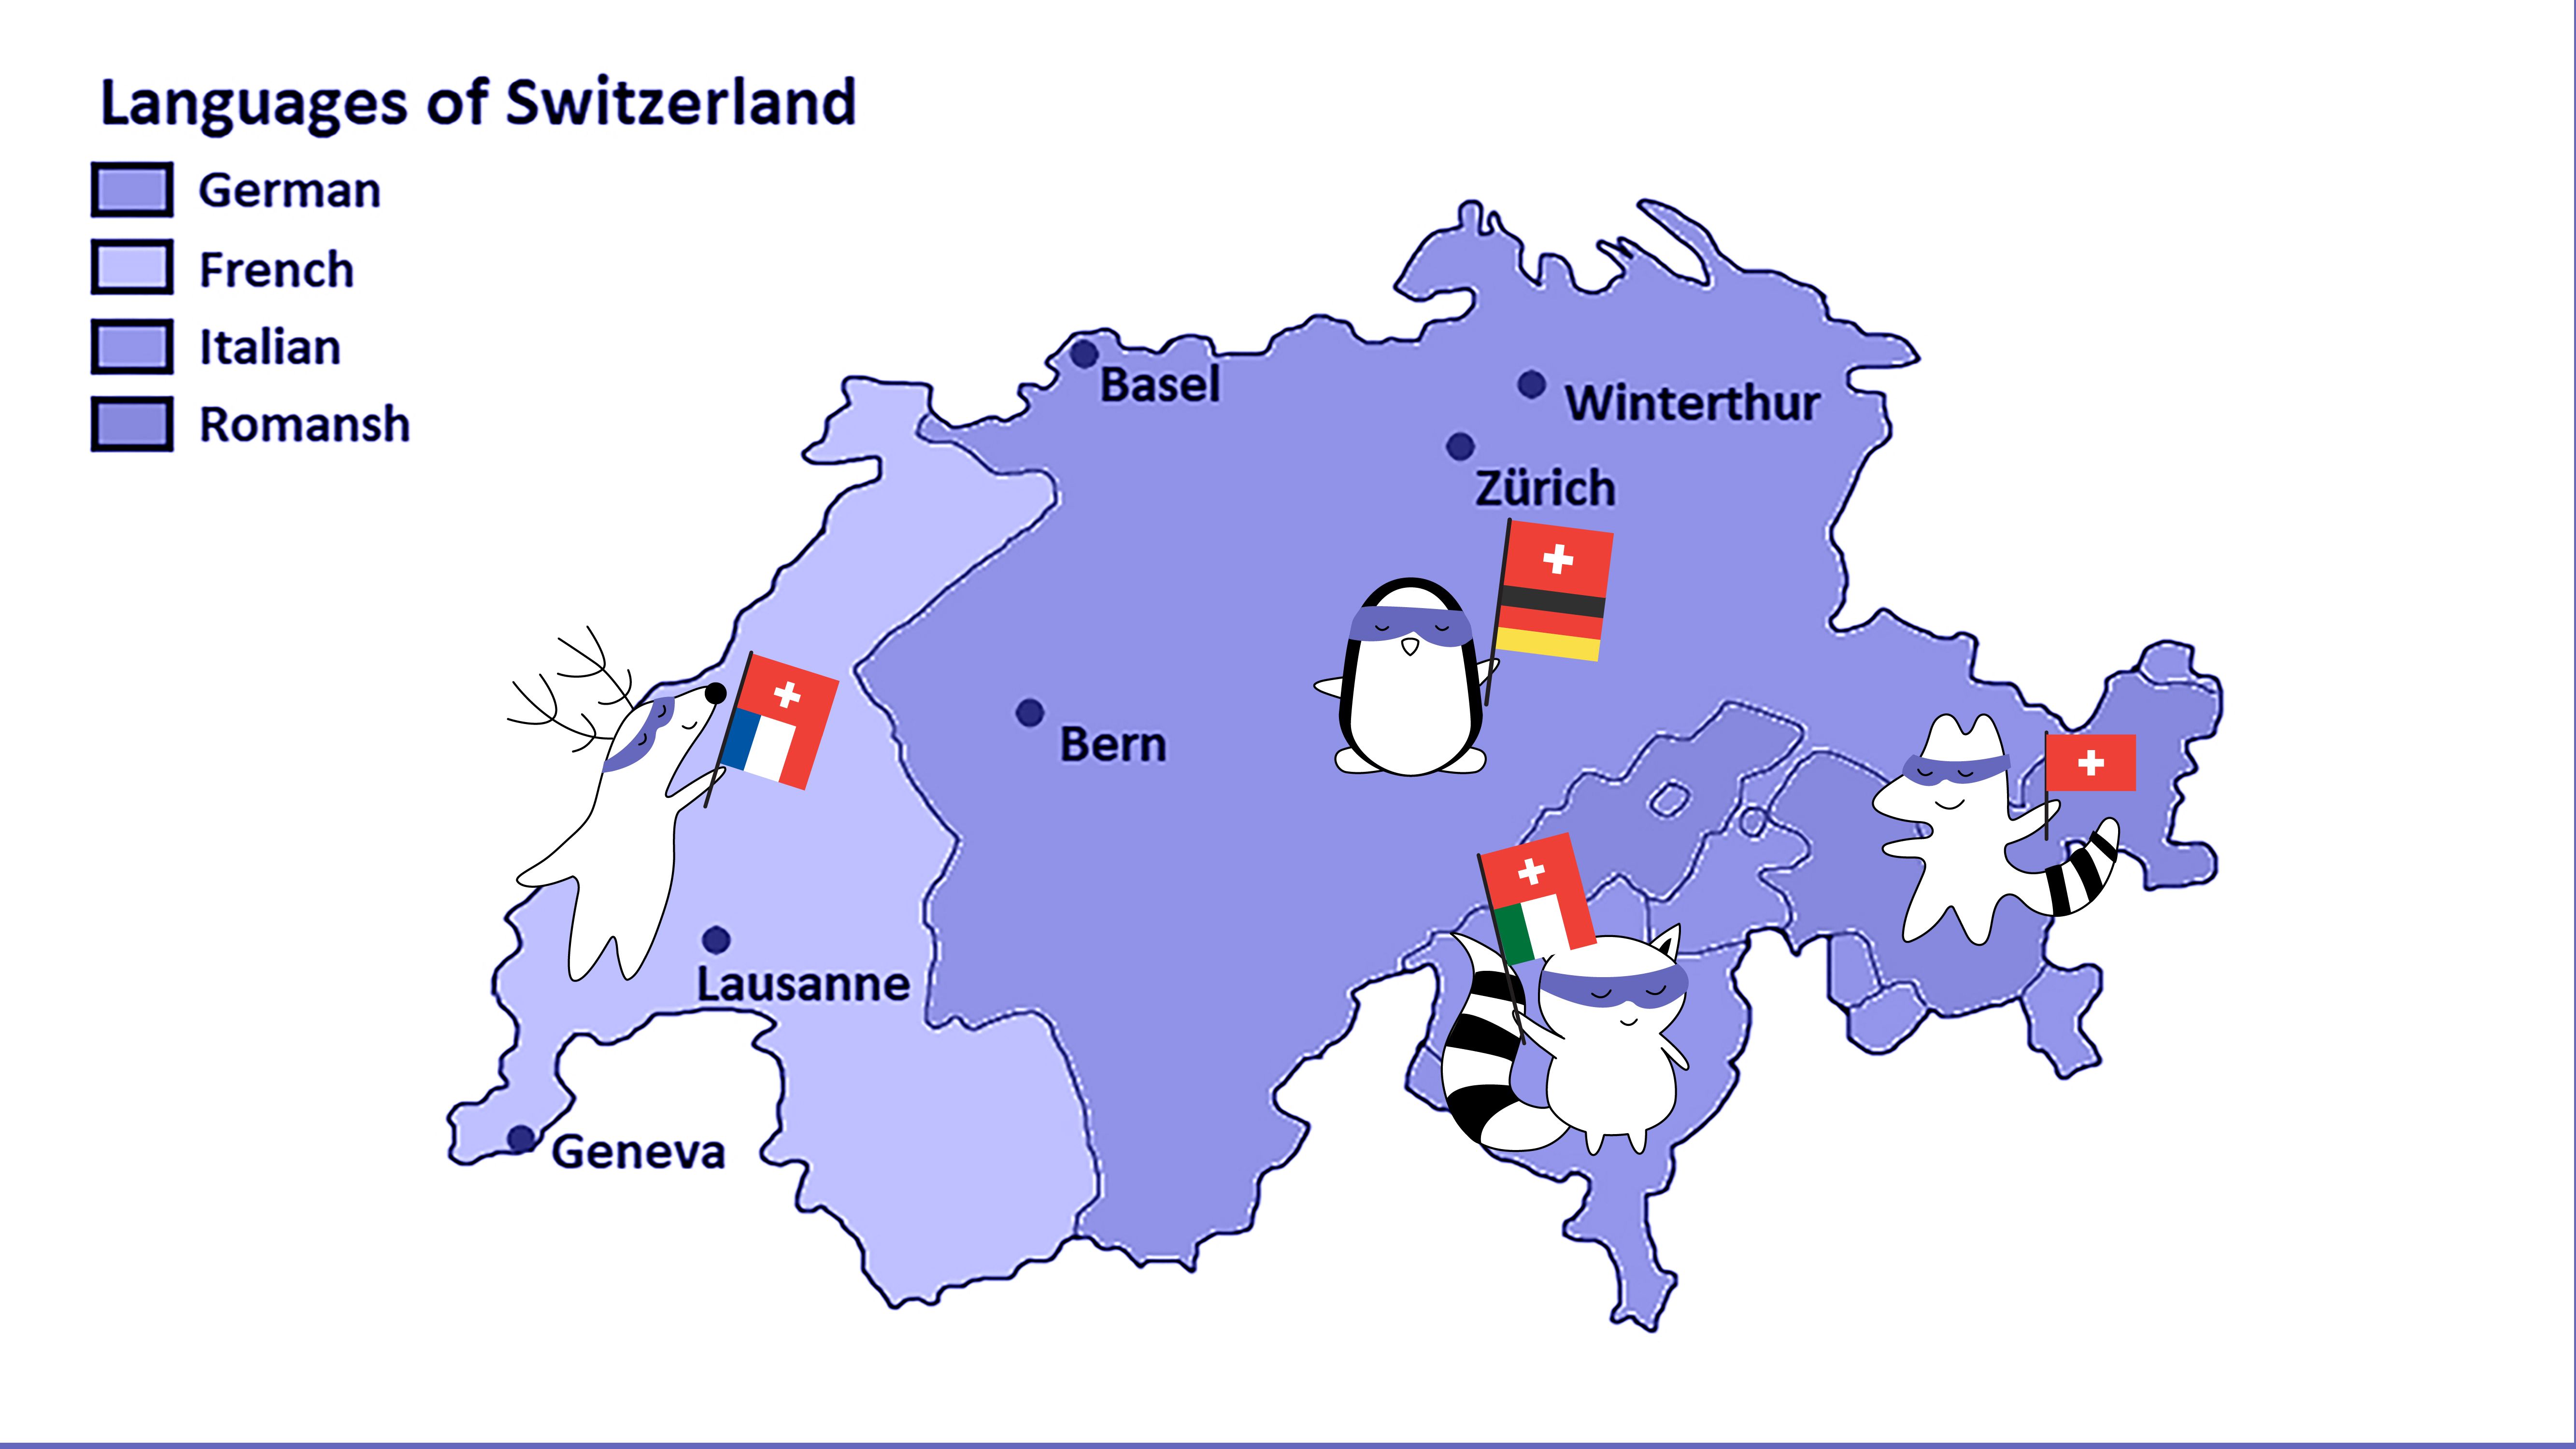 Iggy joins the same map in the Grisons region, holding a Swiss flag.